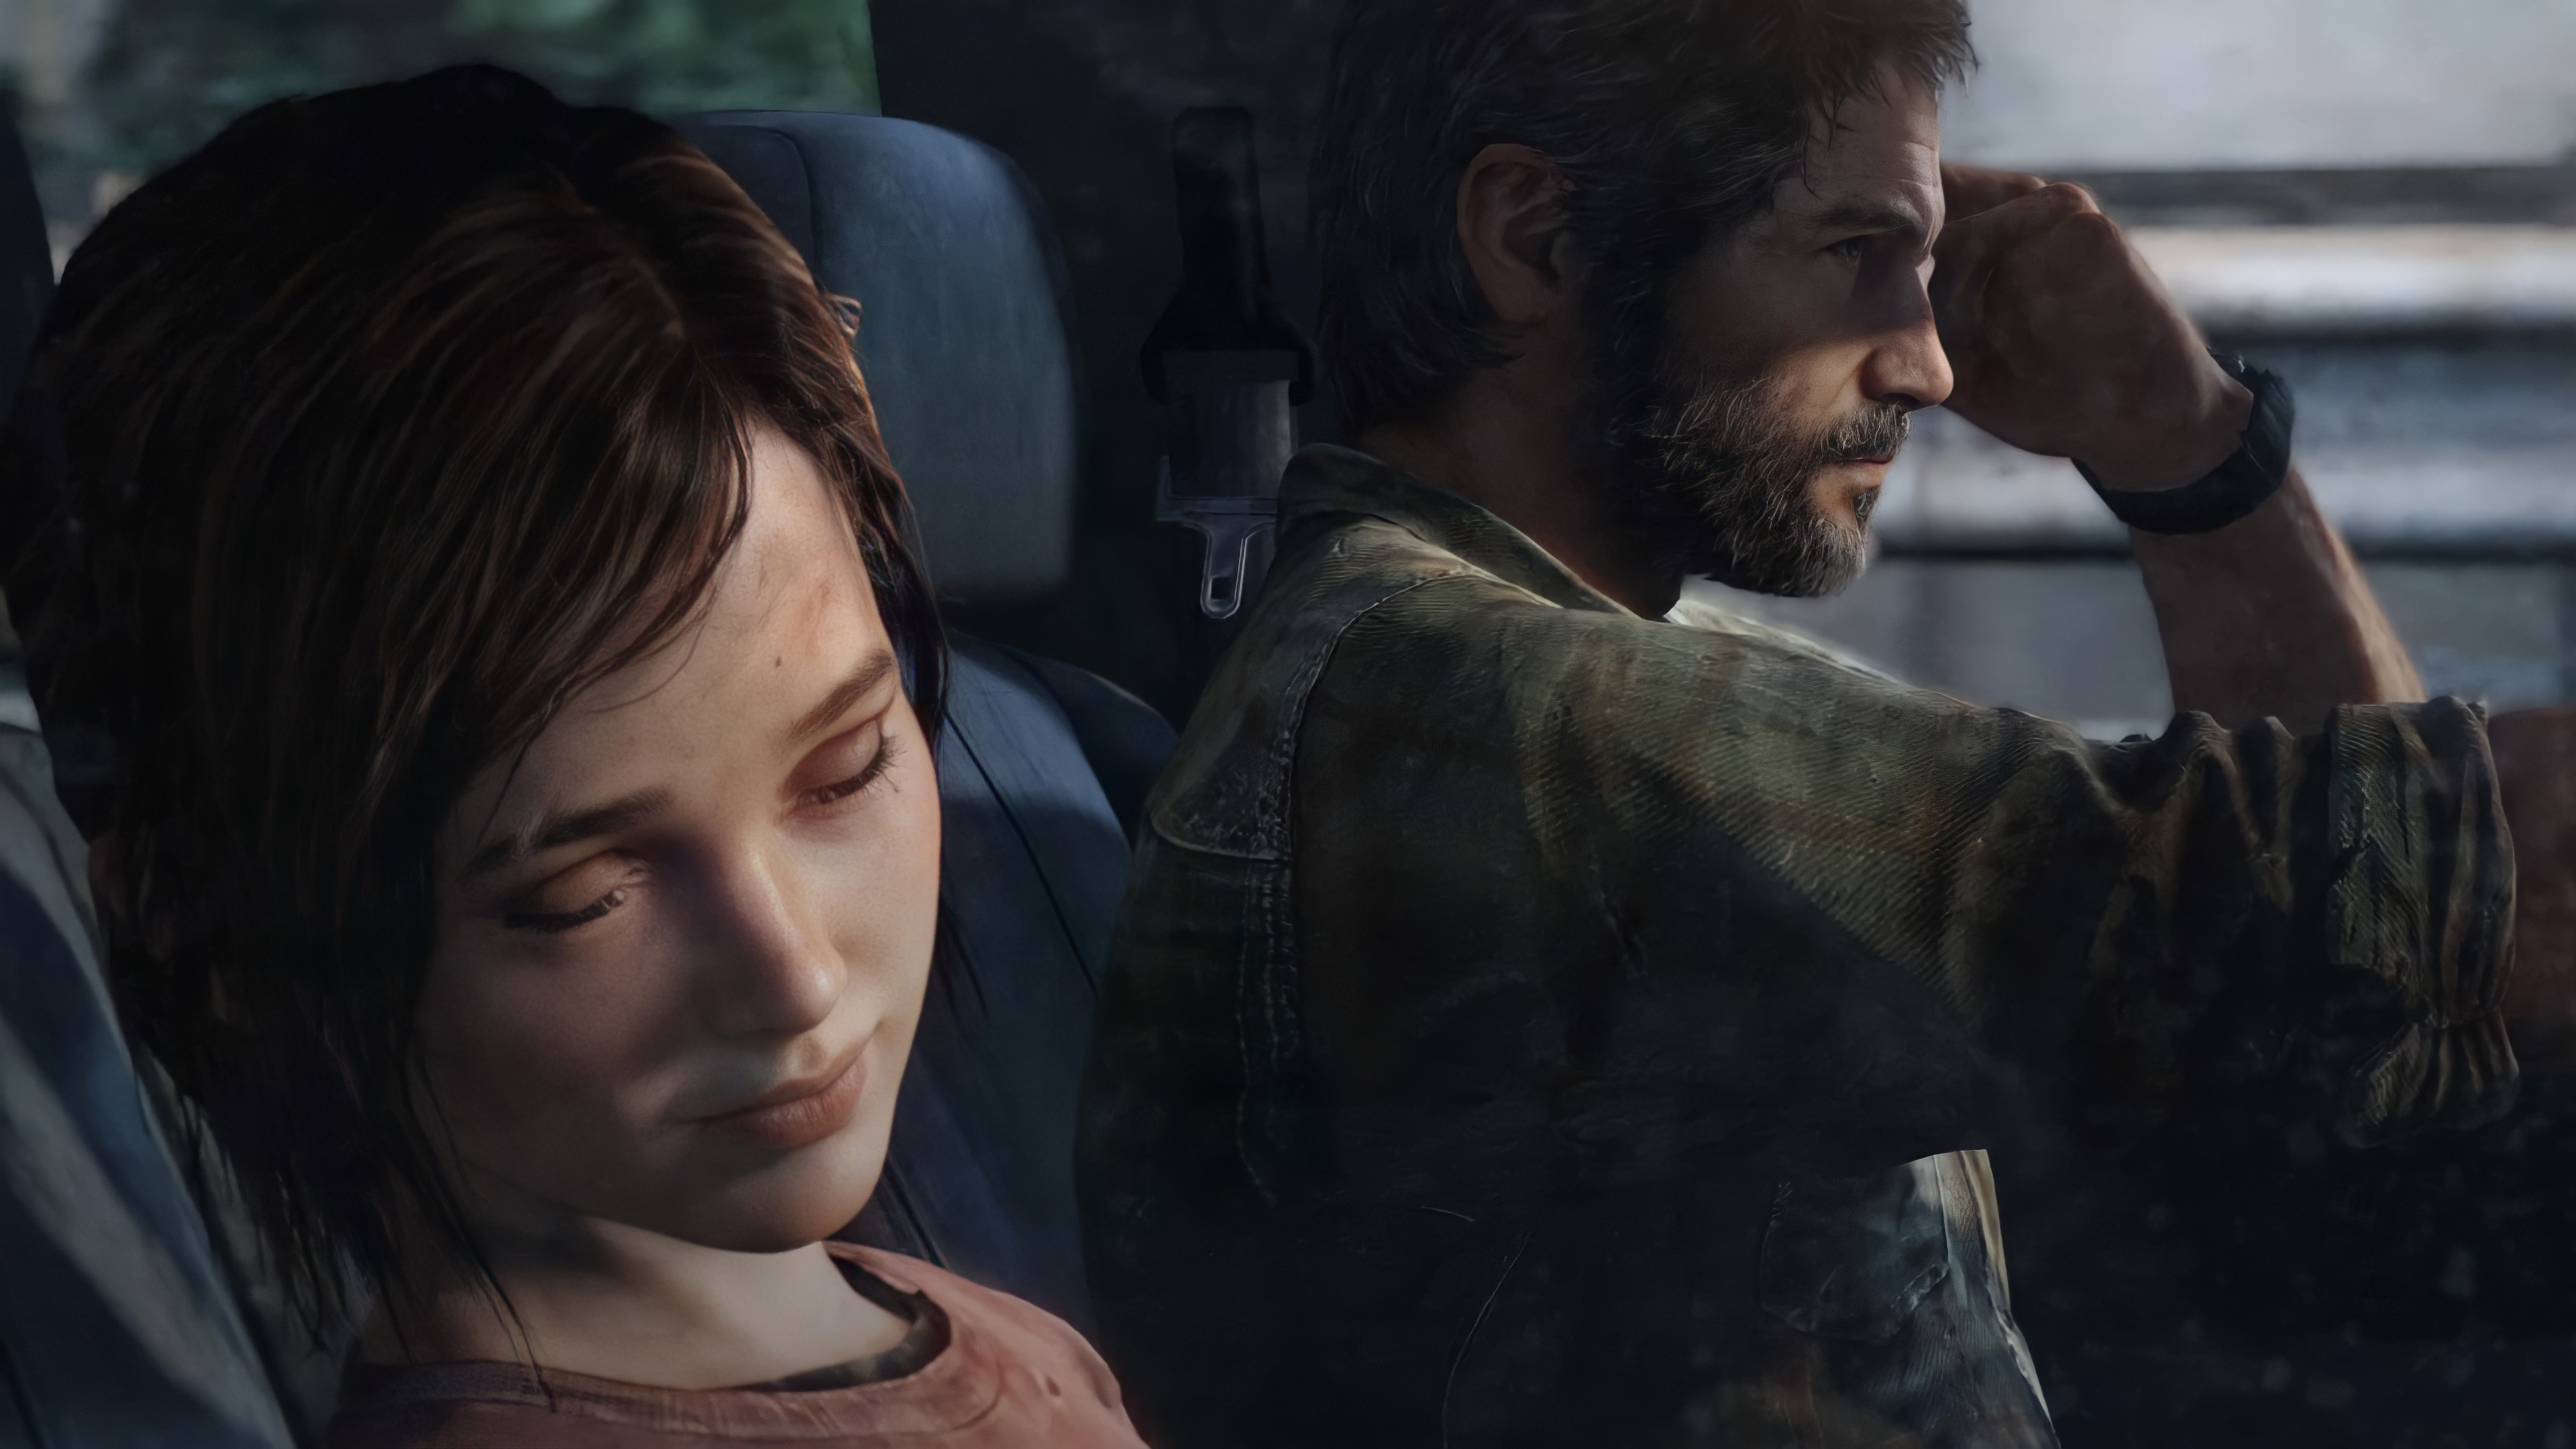 Only two of us. The last of us на плейстейшен 4.